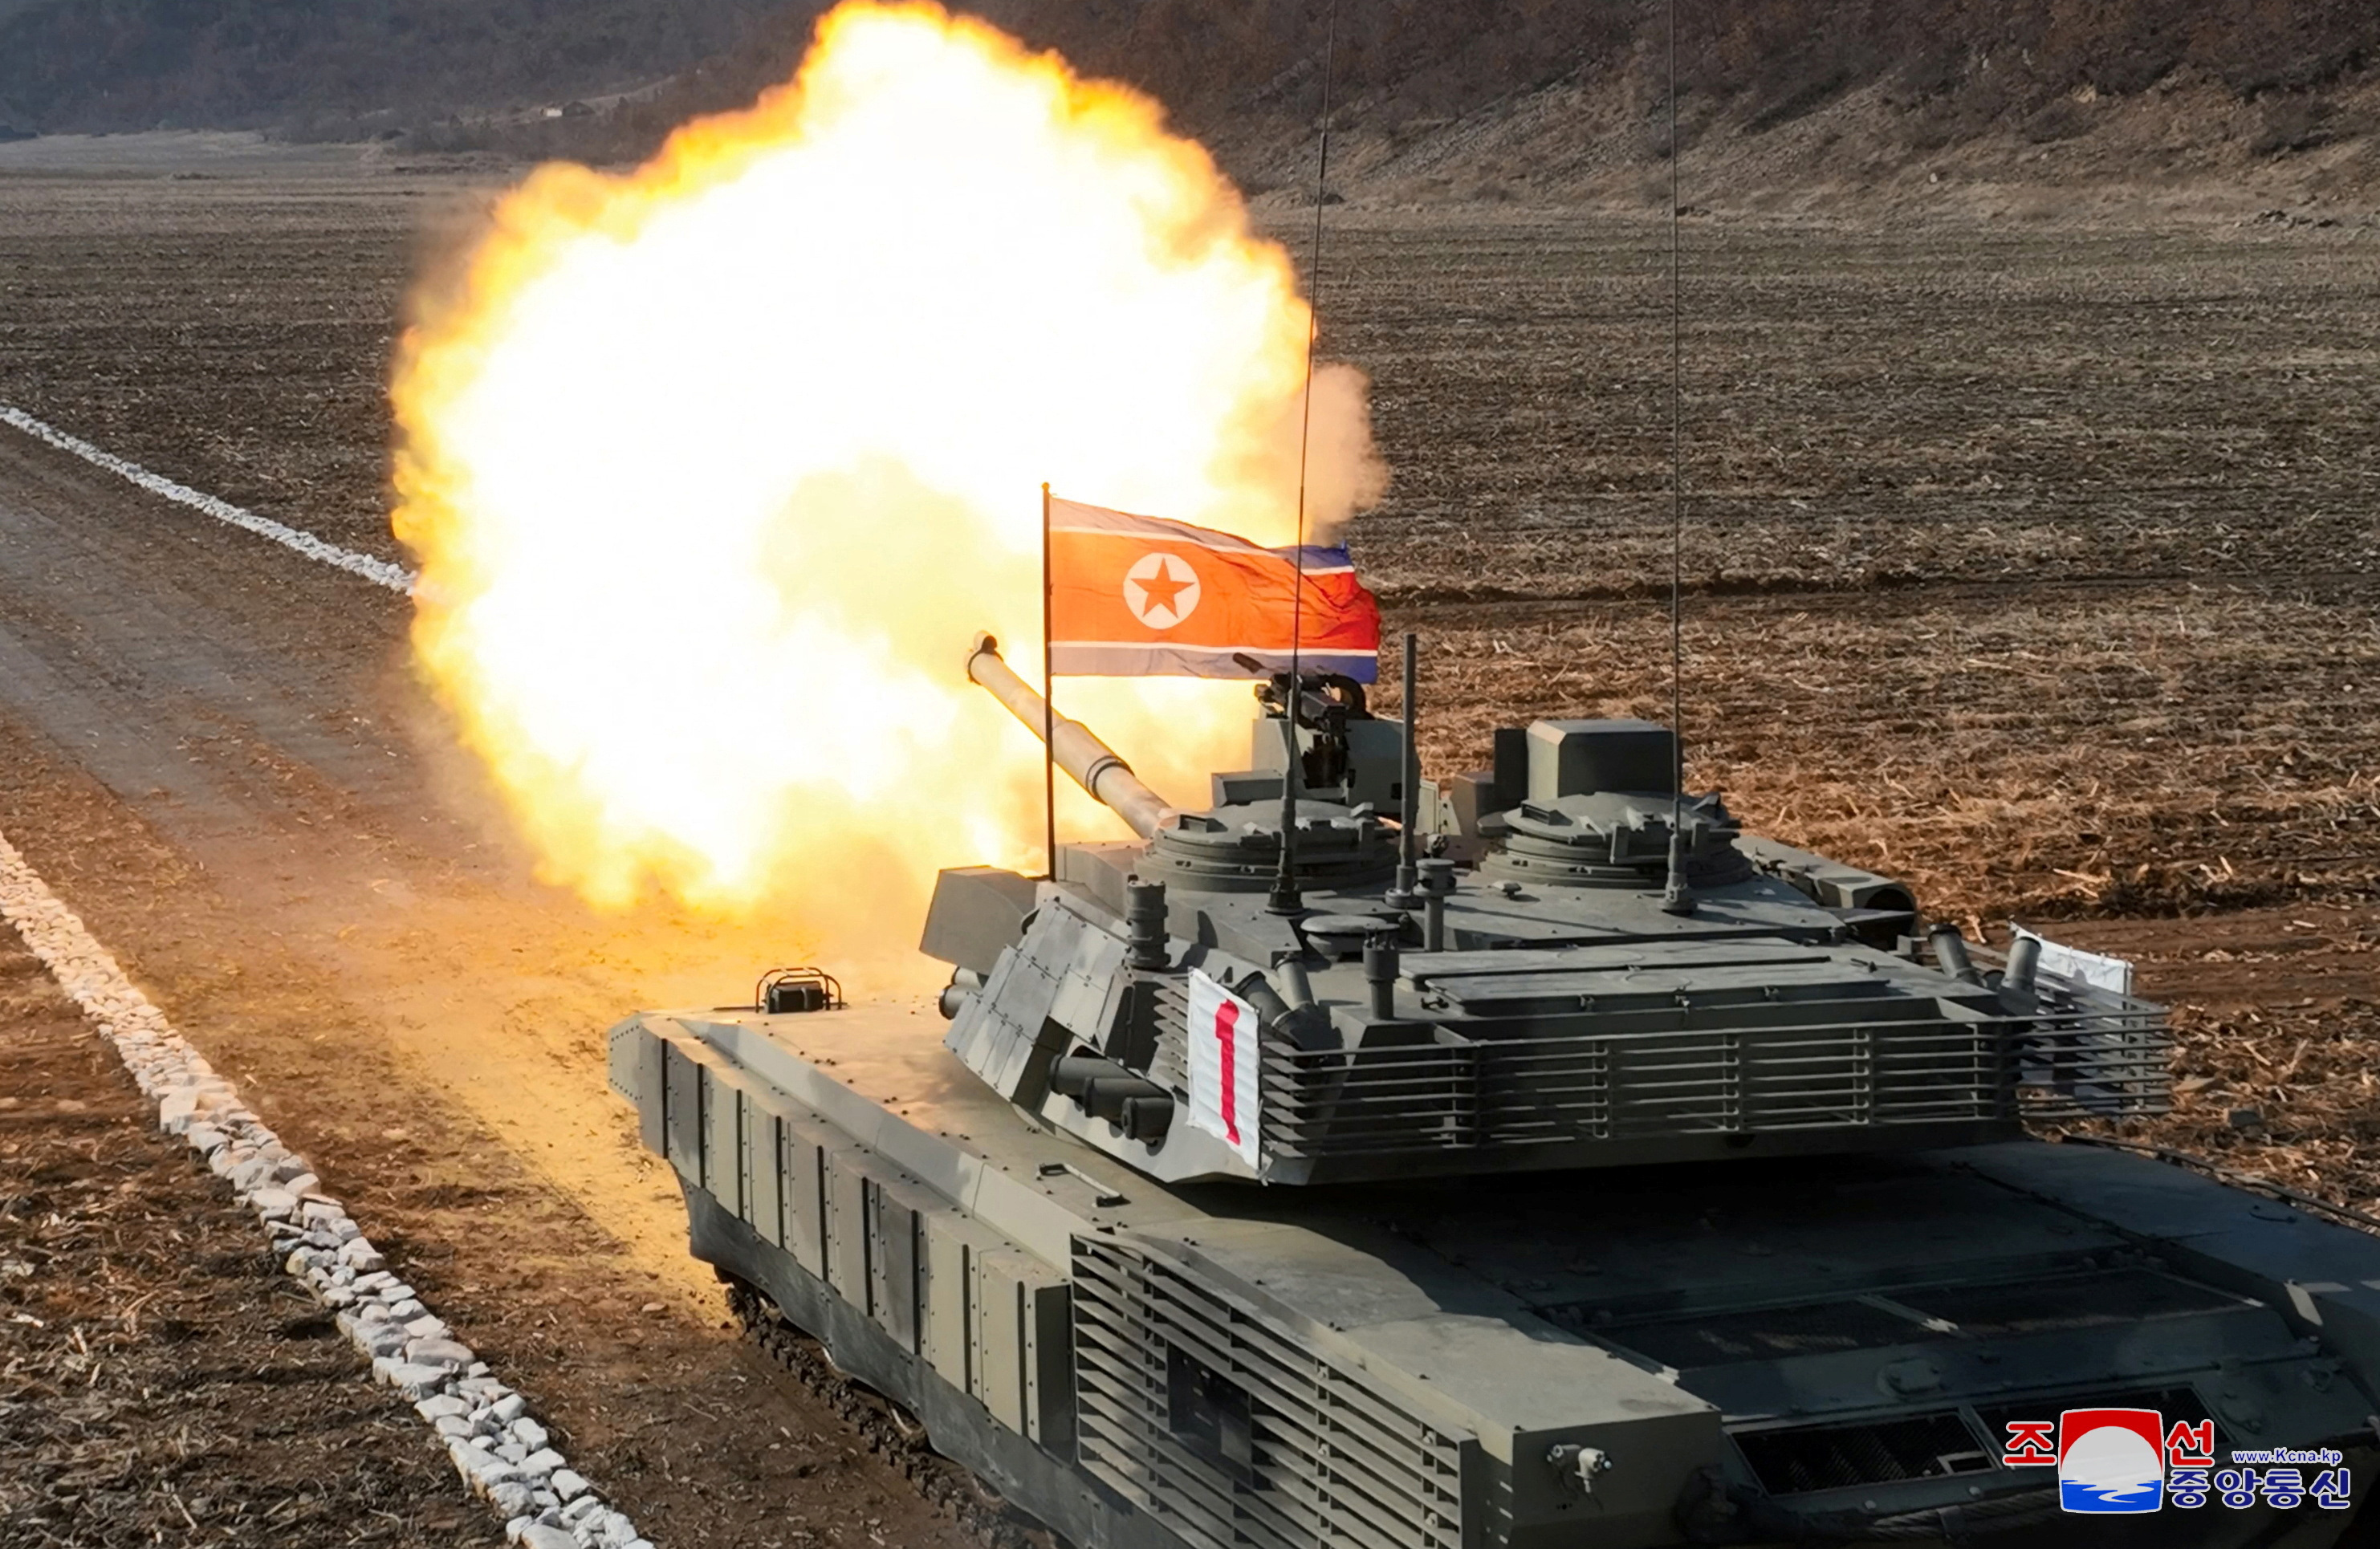 North Korea's Kim drives newly developed battle tank during launch